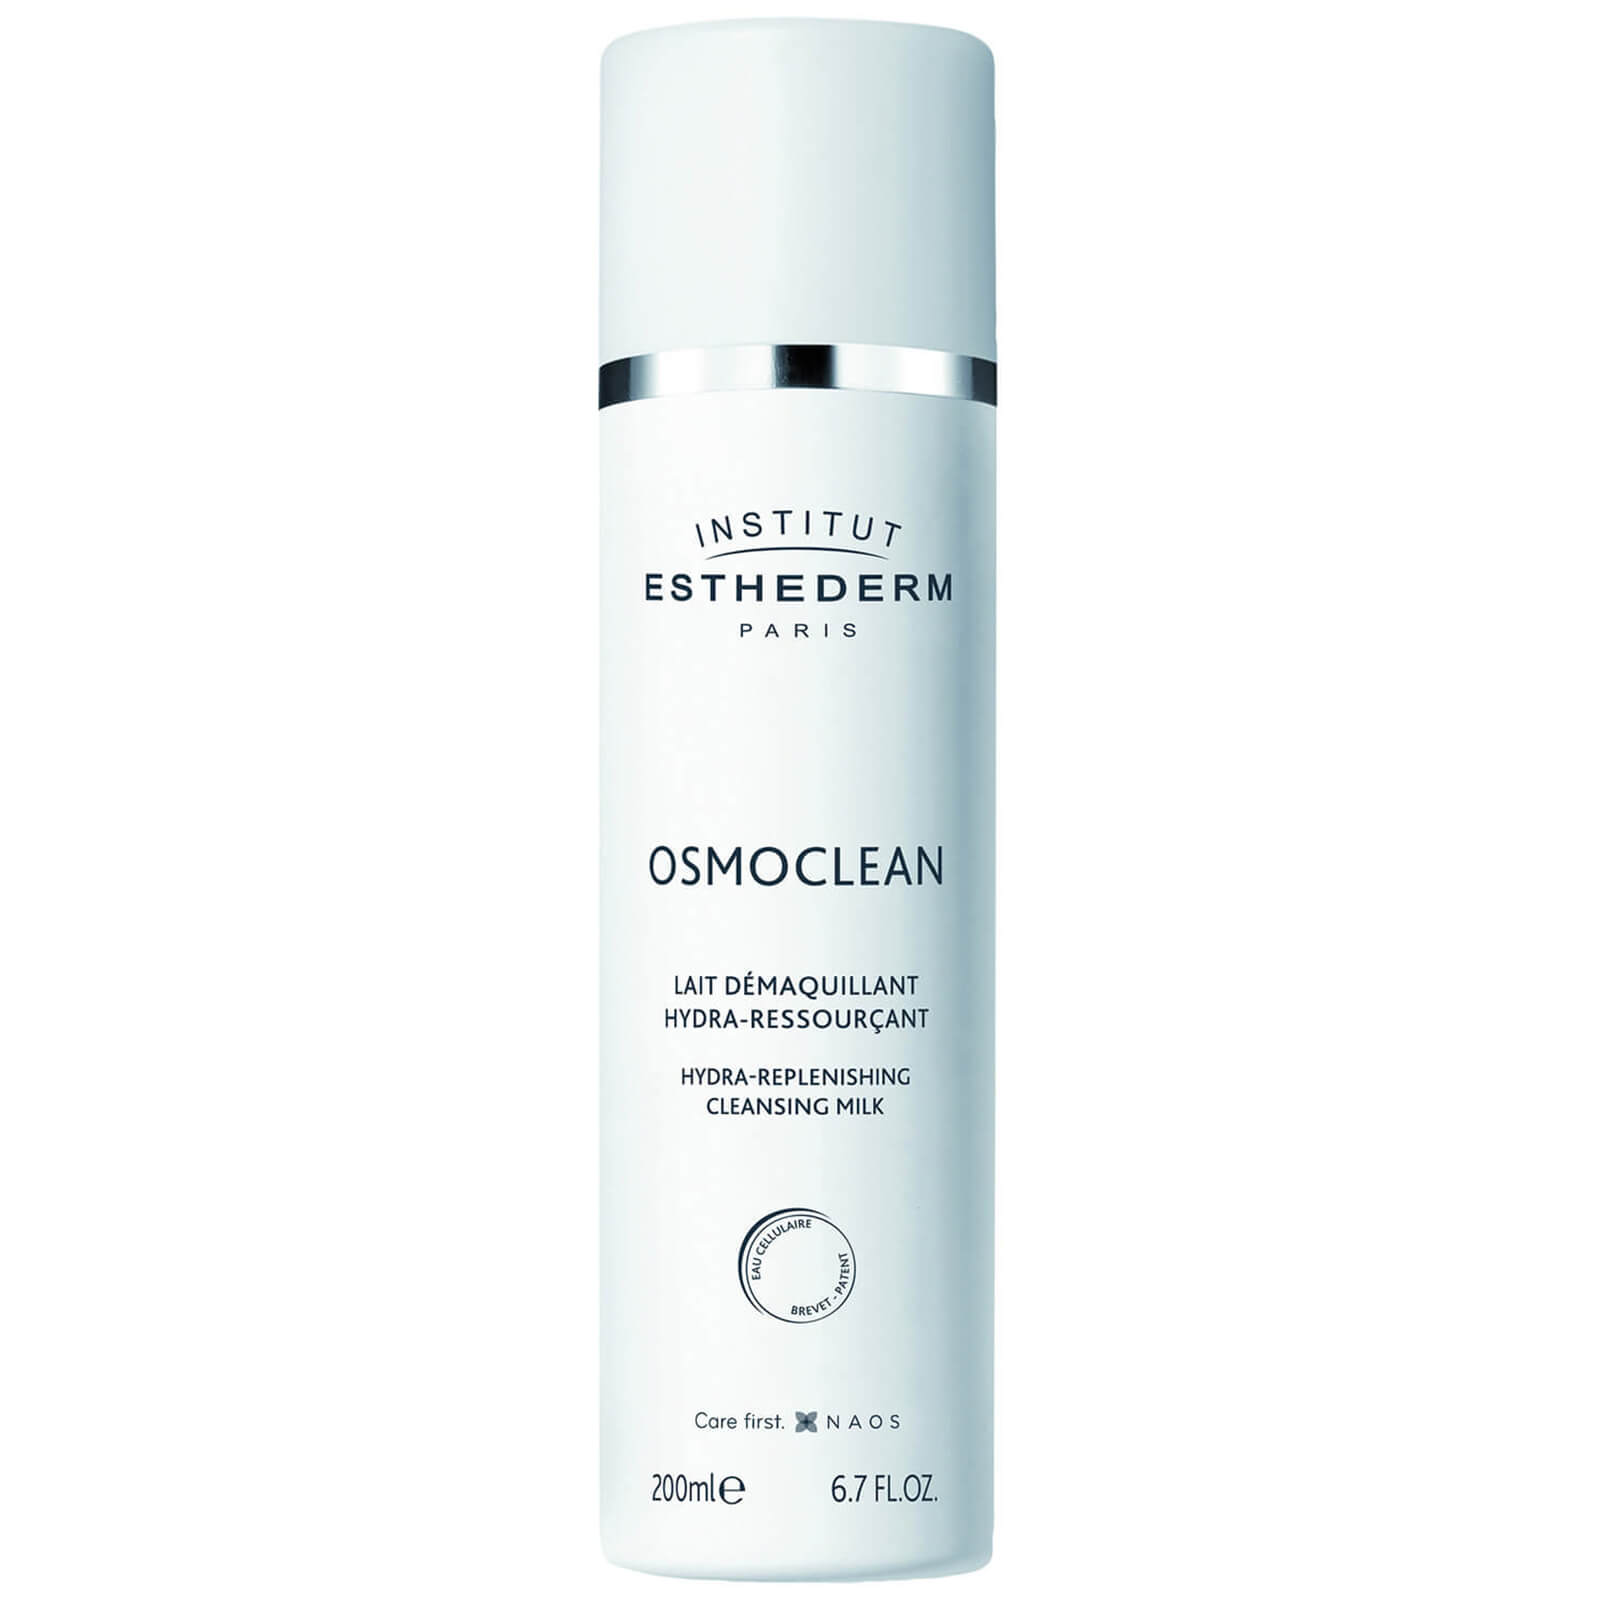 Photos - Facial / Body Cleansing Product Institut Esthederm Osmoclean Hydrating Cleansing Milk 200ml V600102 